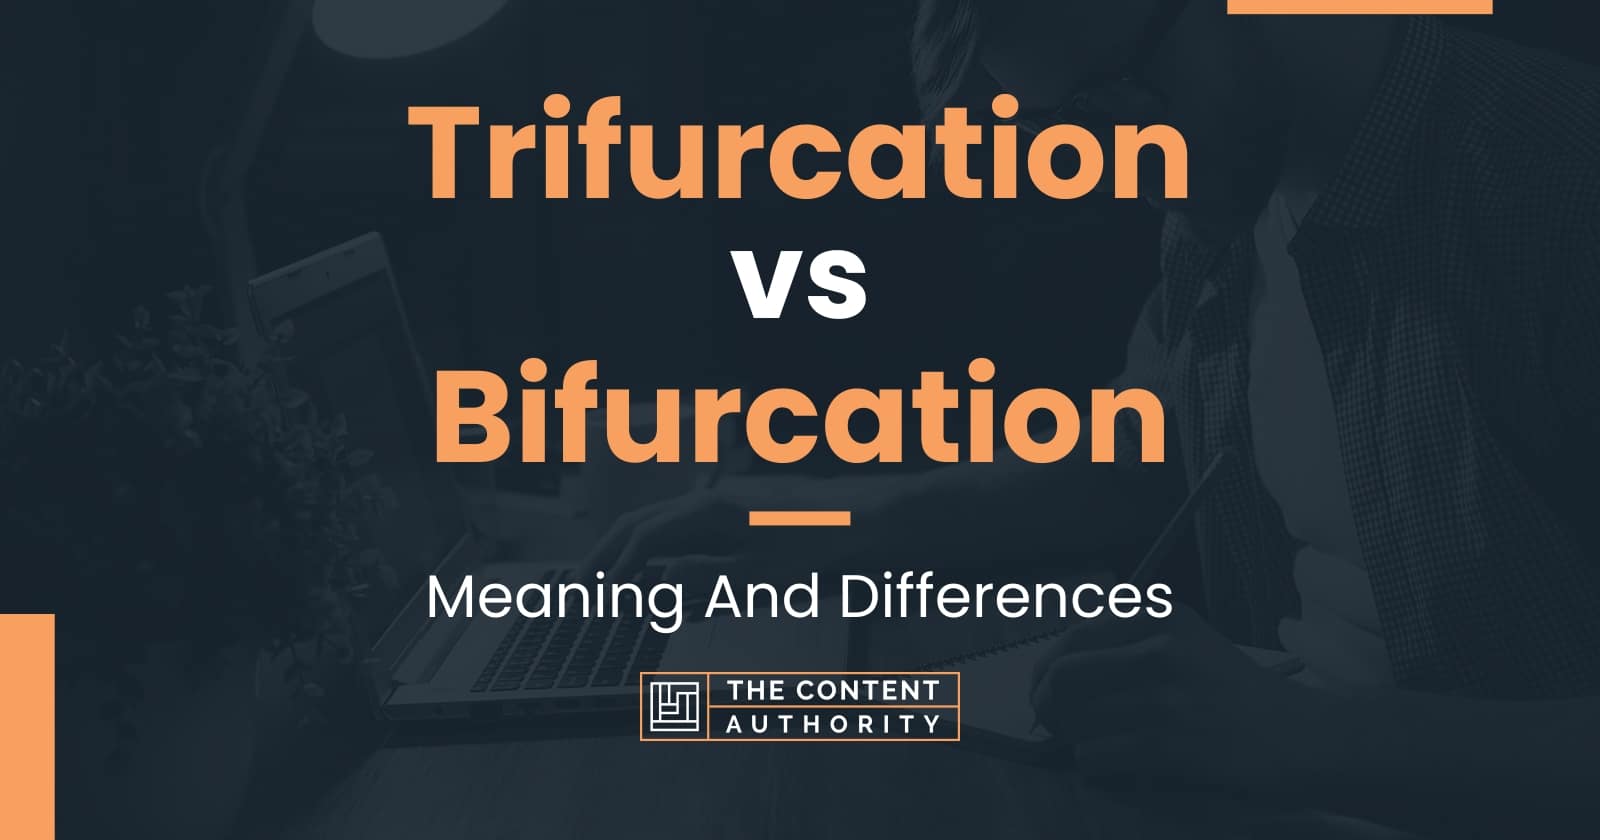 Trifurcation vs Bifurcation: Meaning And Differences